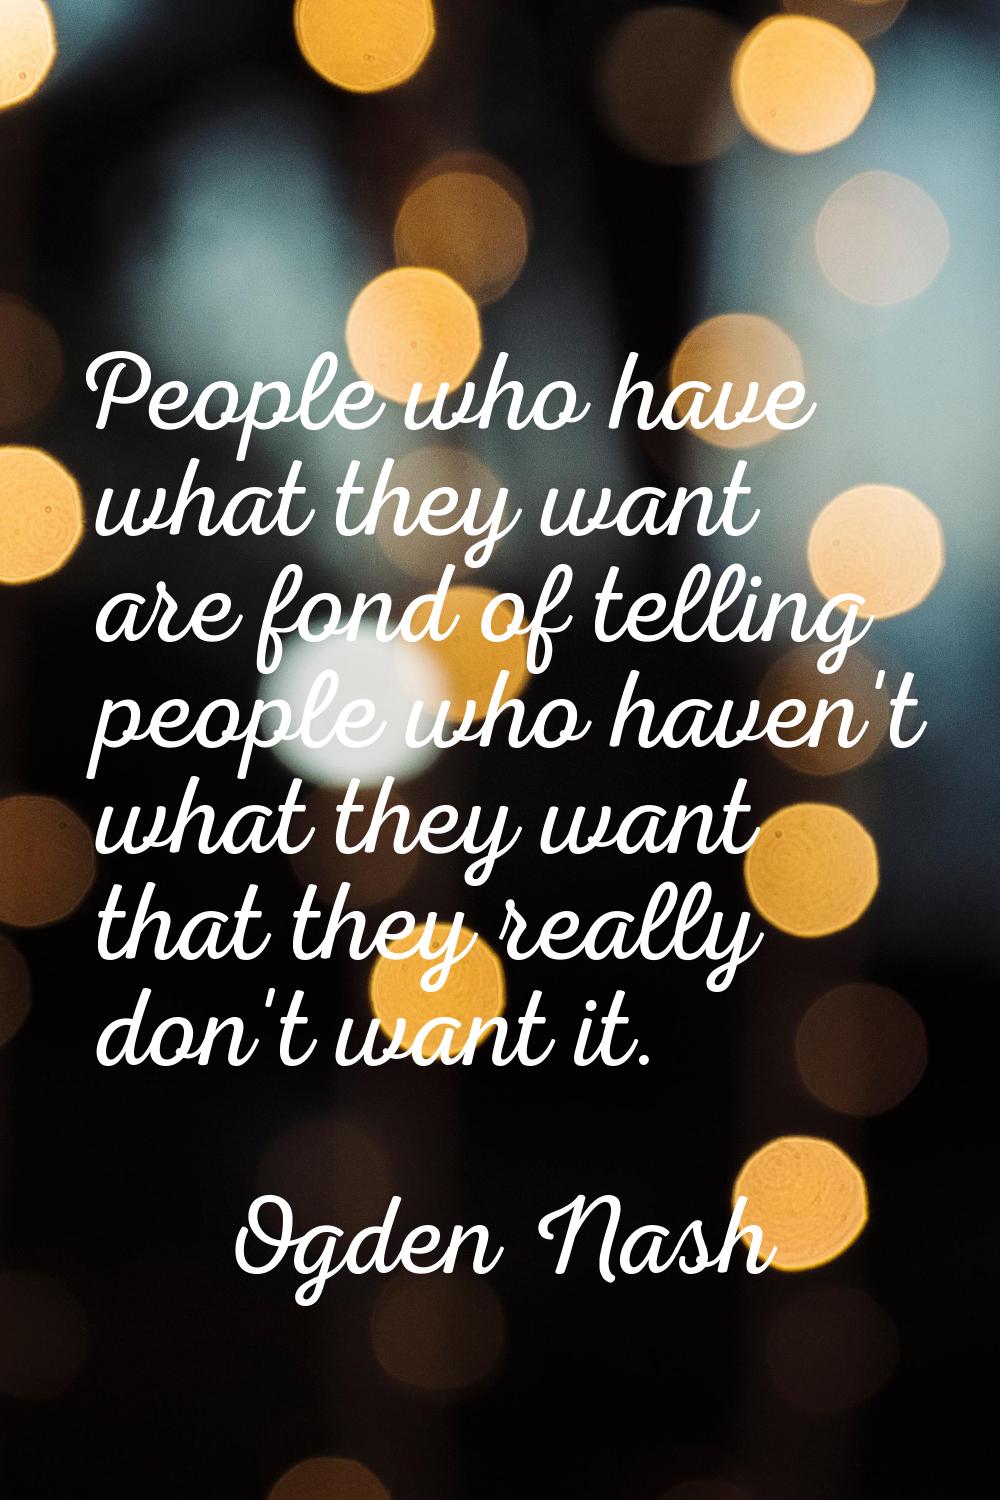 People who have what they want are fond of telling people who haven't what they want that they real